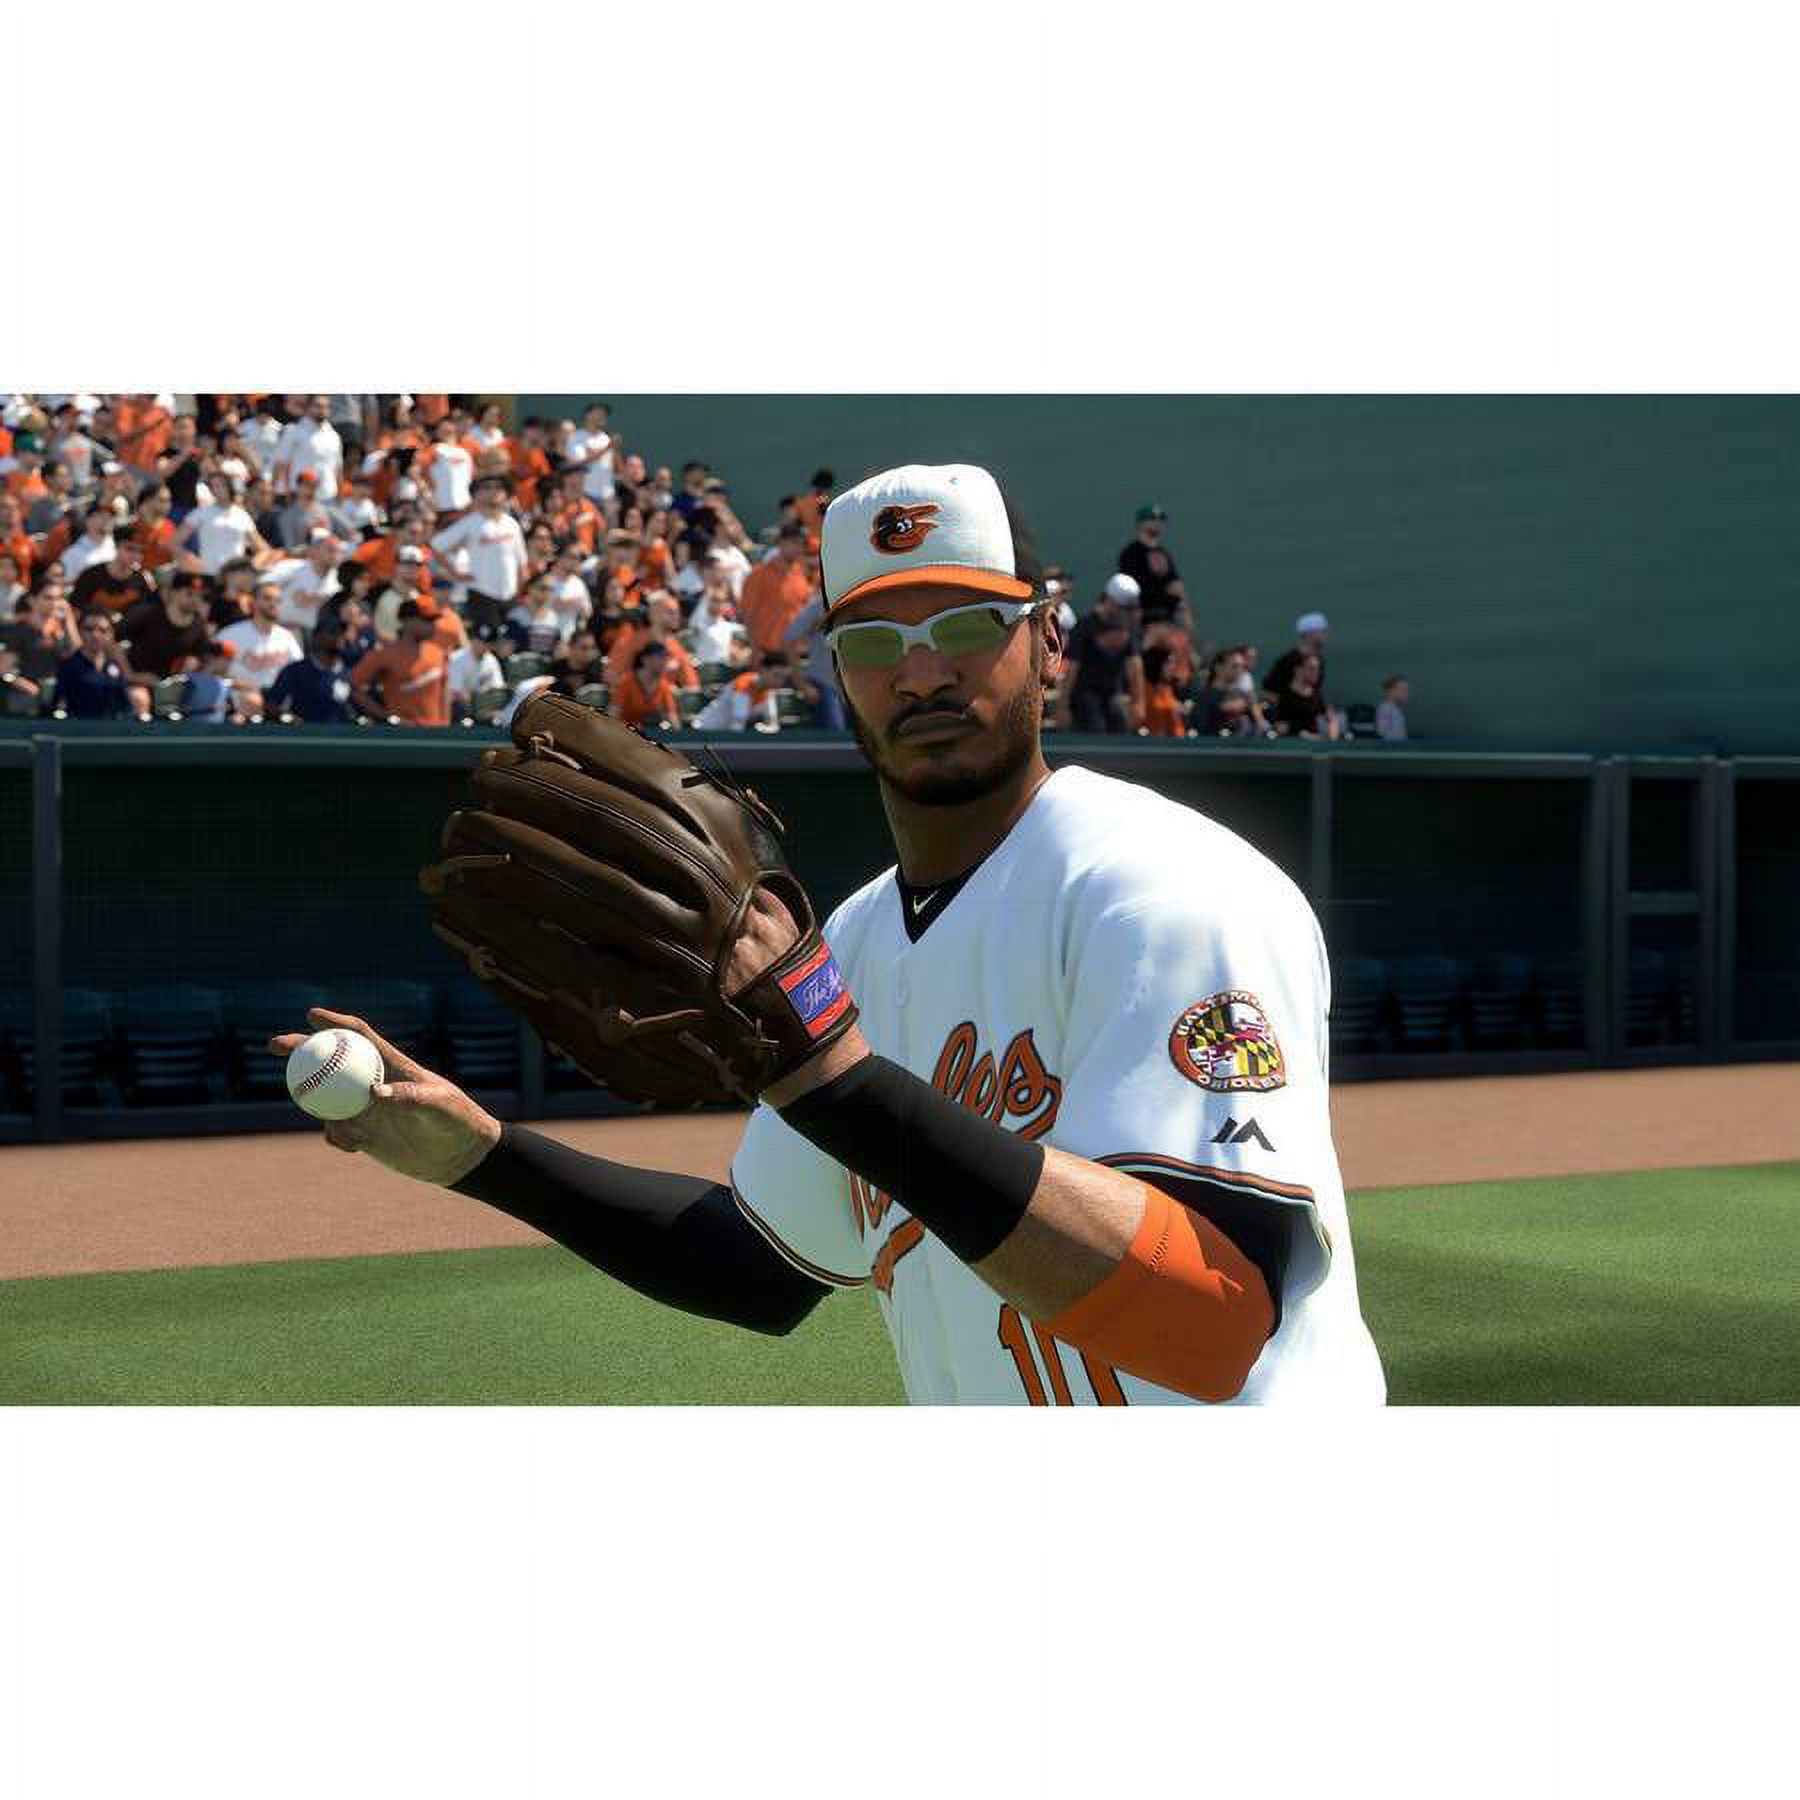 Sony MLB 15: The Show (PS4) - Video Game - image 3 of 5